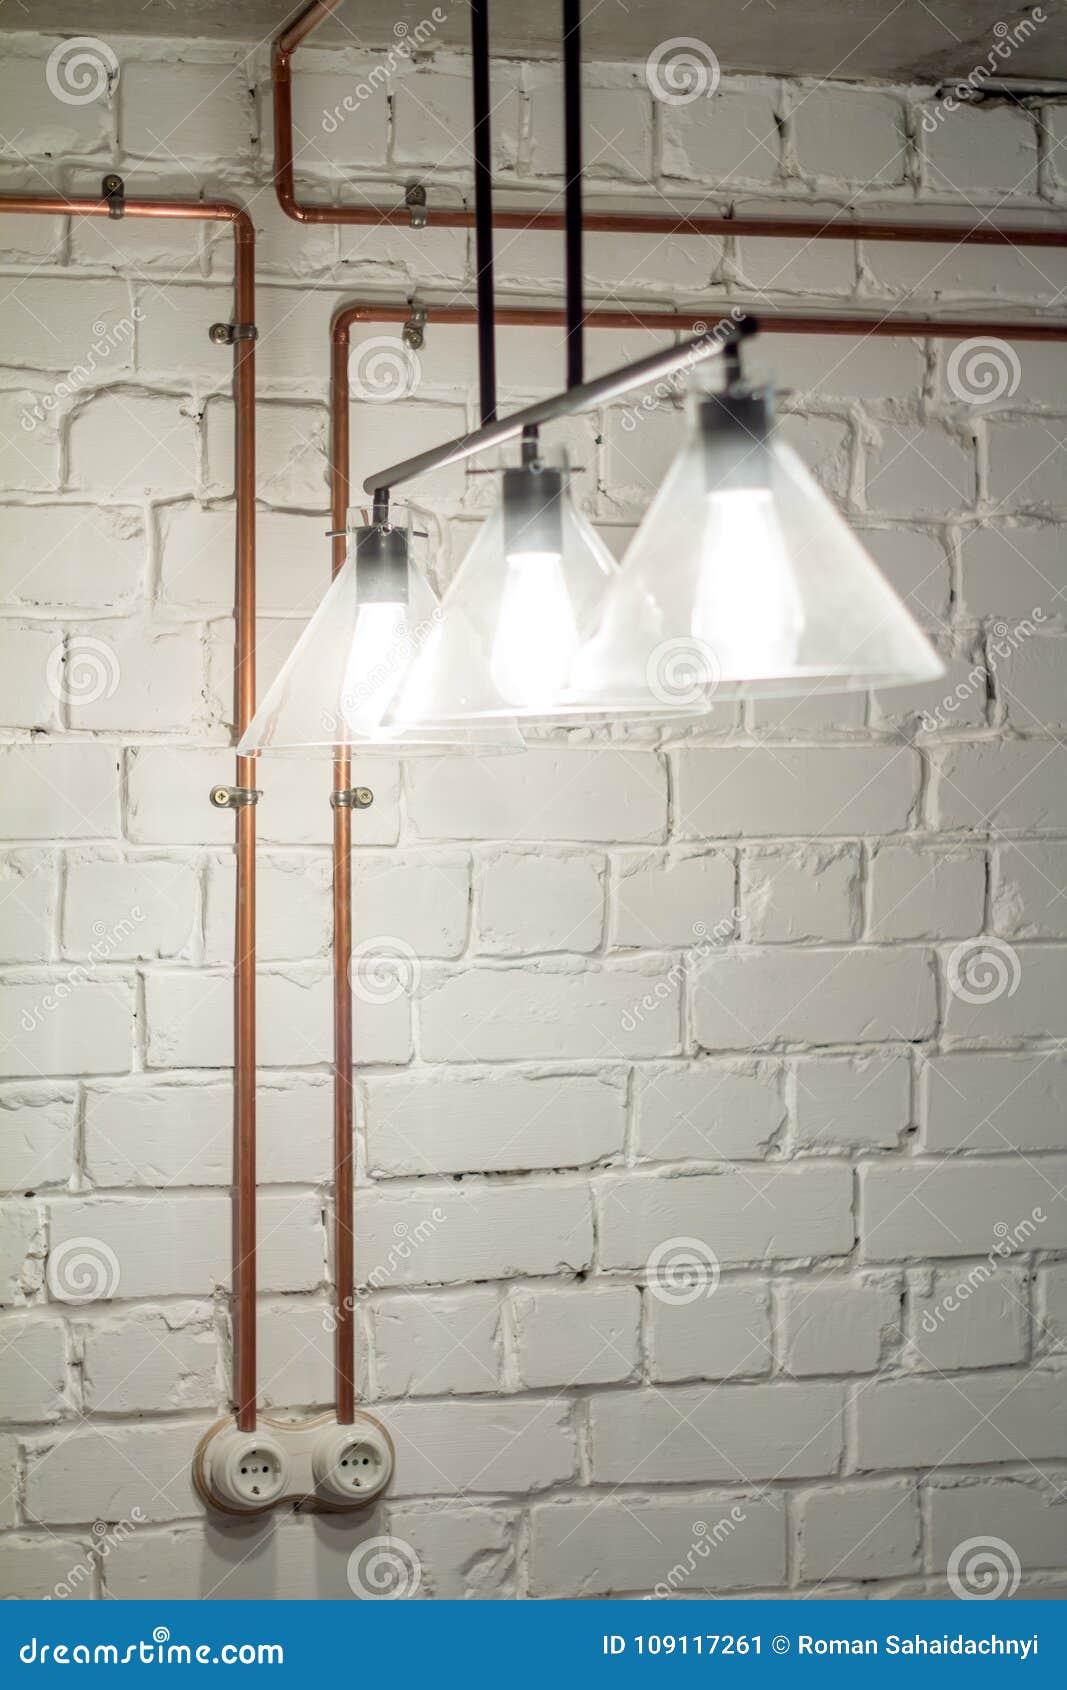 A Vintage Outlet And Electrical Wiring In A Copper Tube Stock Image